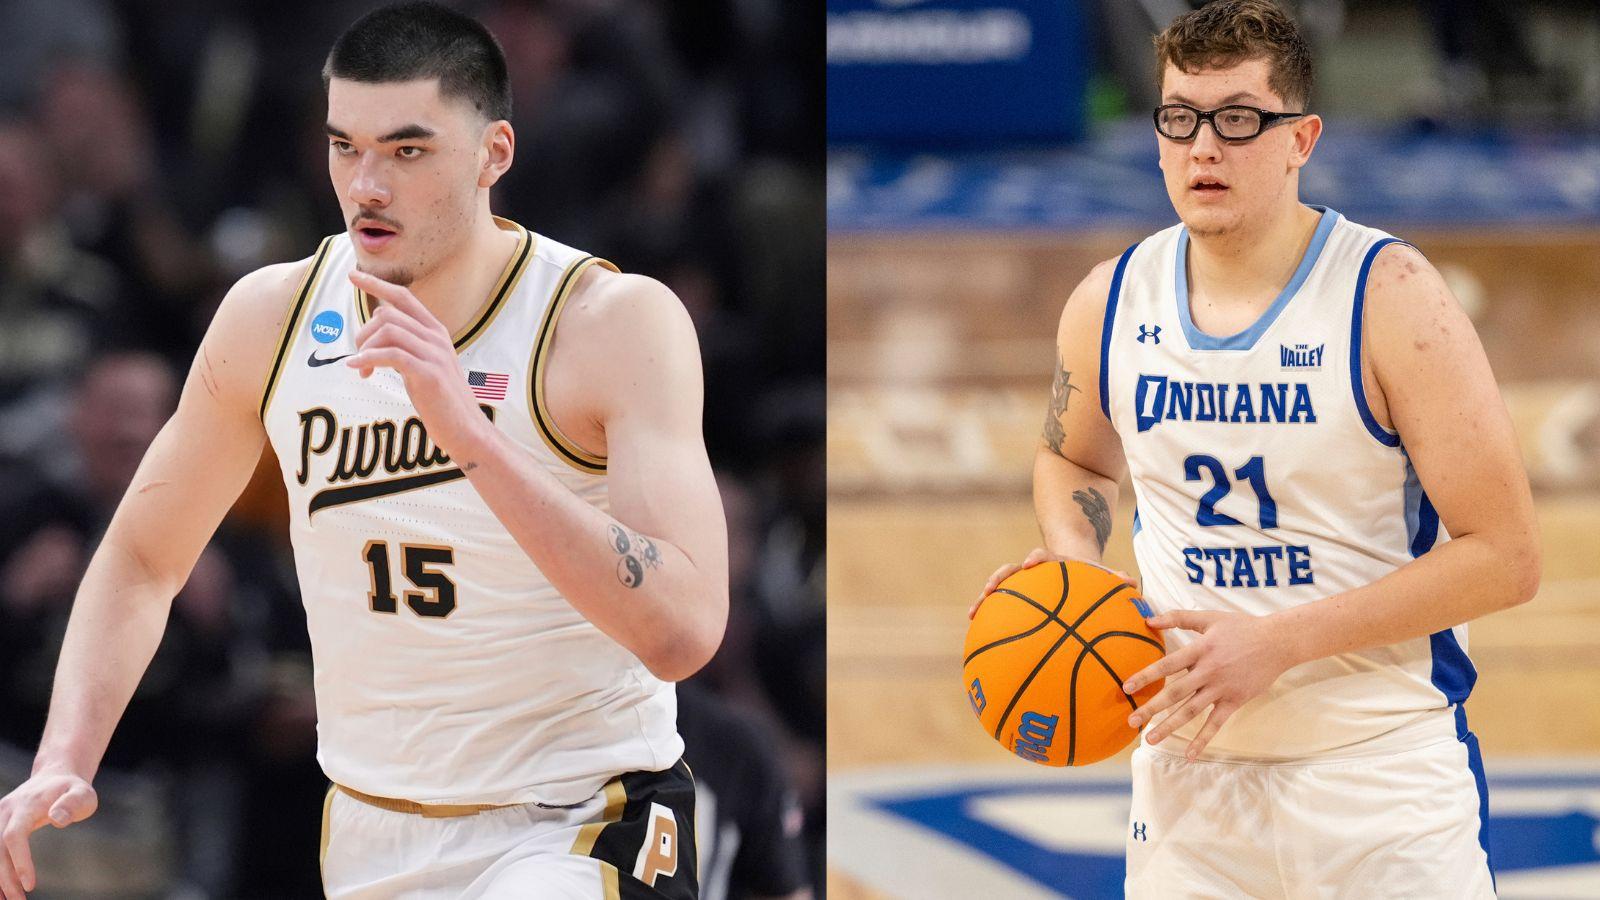 Zach Edey as a member of the Purdue Boilermakers (left) and Robbie Avila as a member of the Indiana State Sycamores (right).